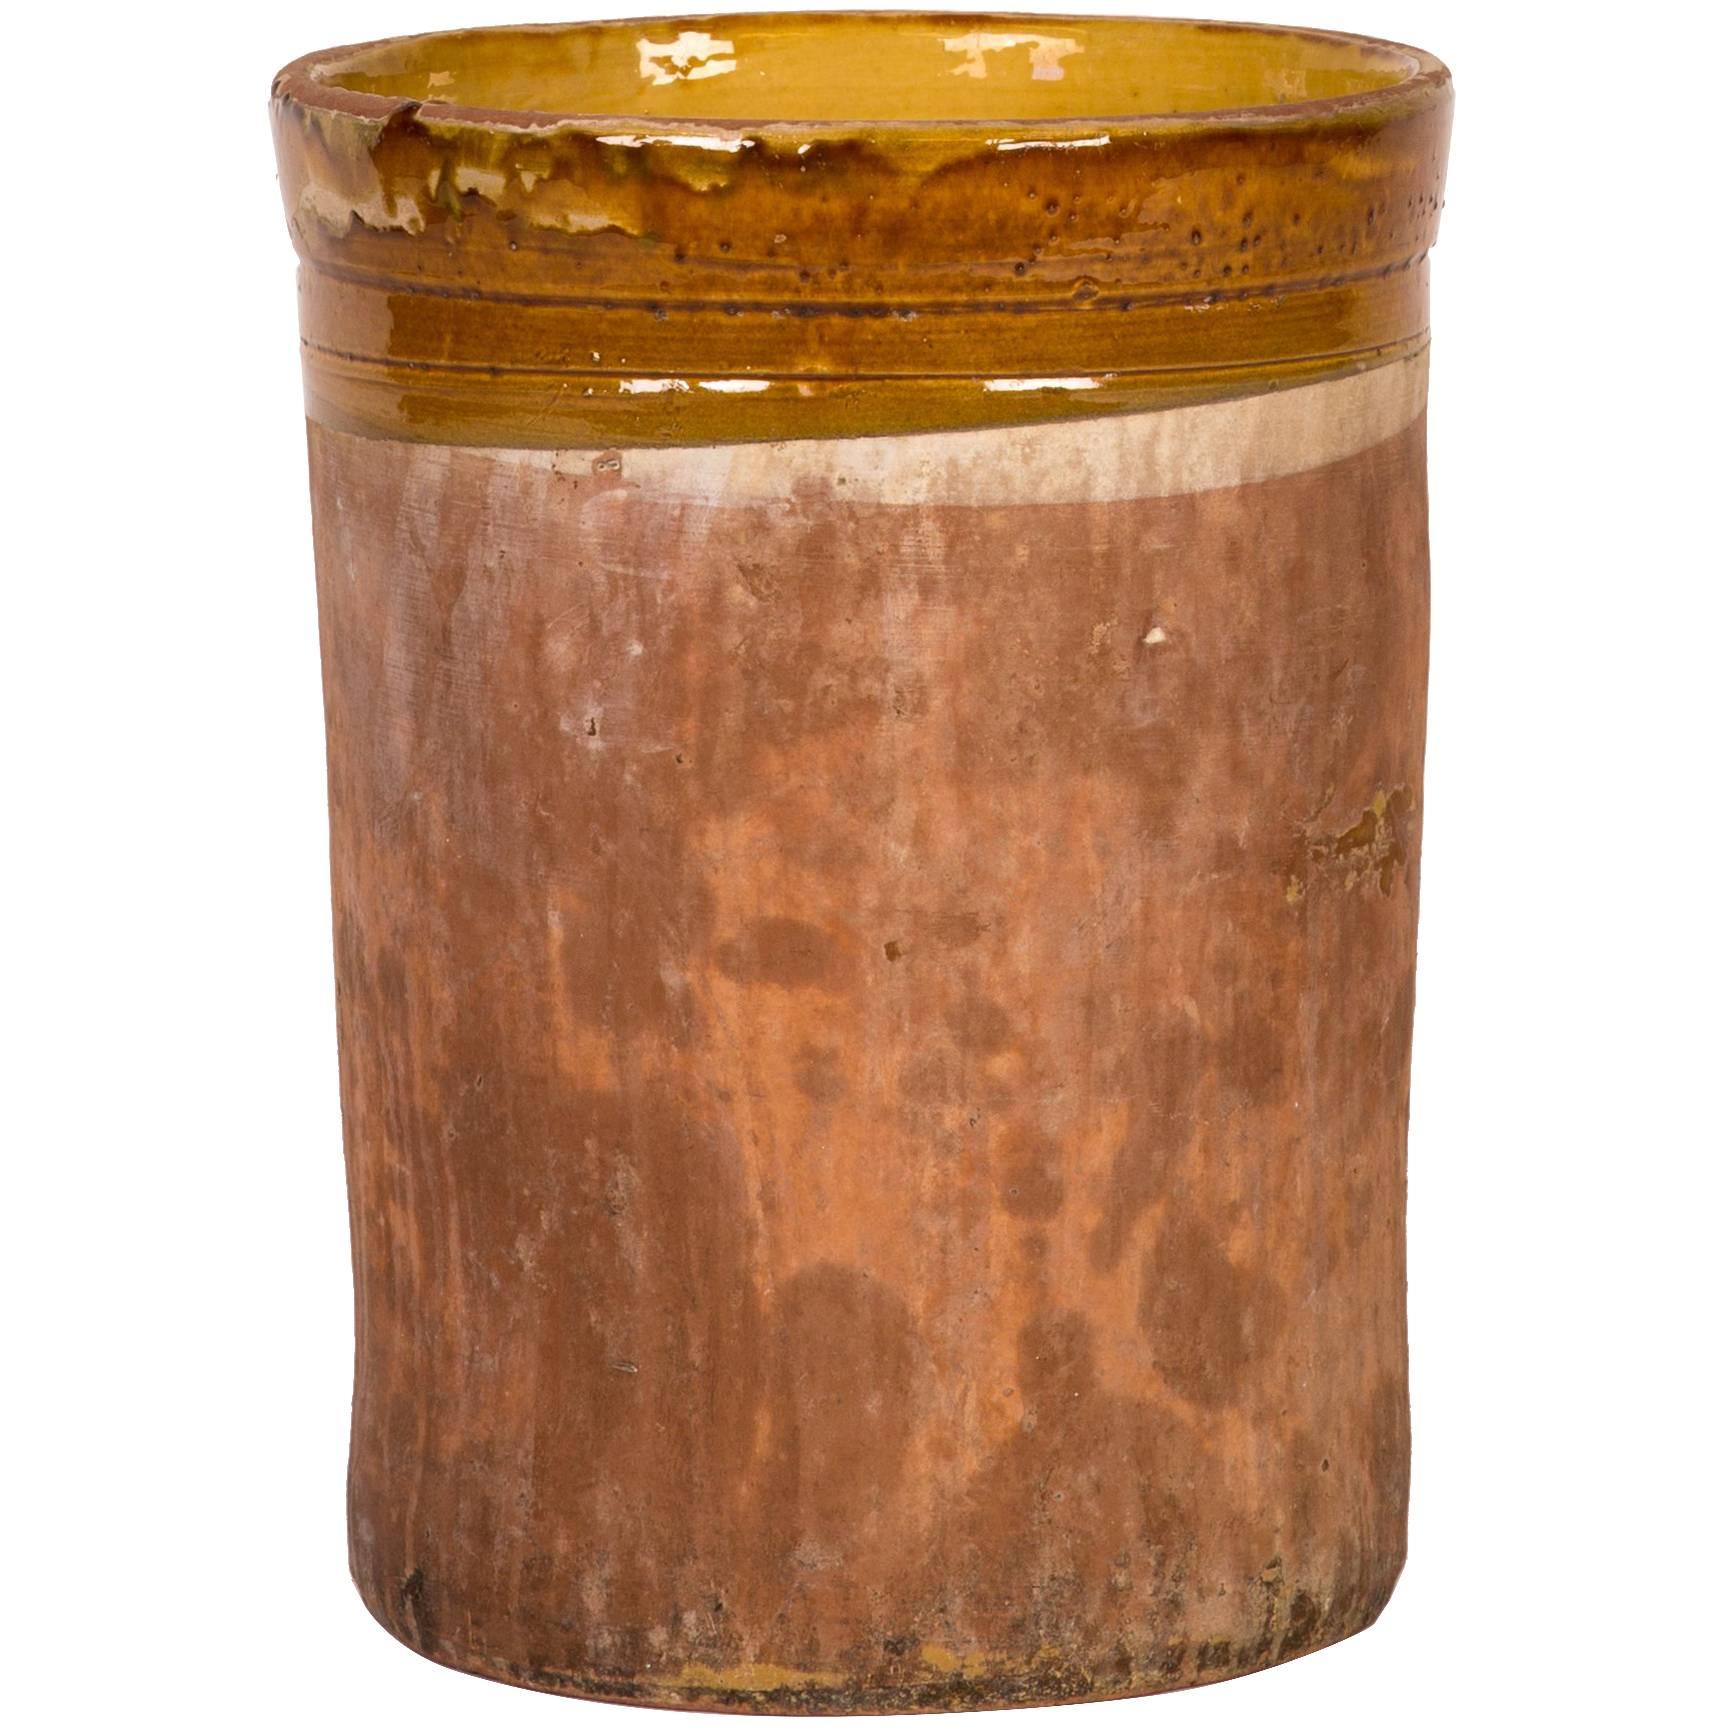 A Cylindrical Pot with Yellow-Banded Glazed Detail